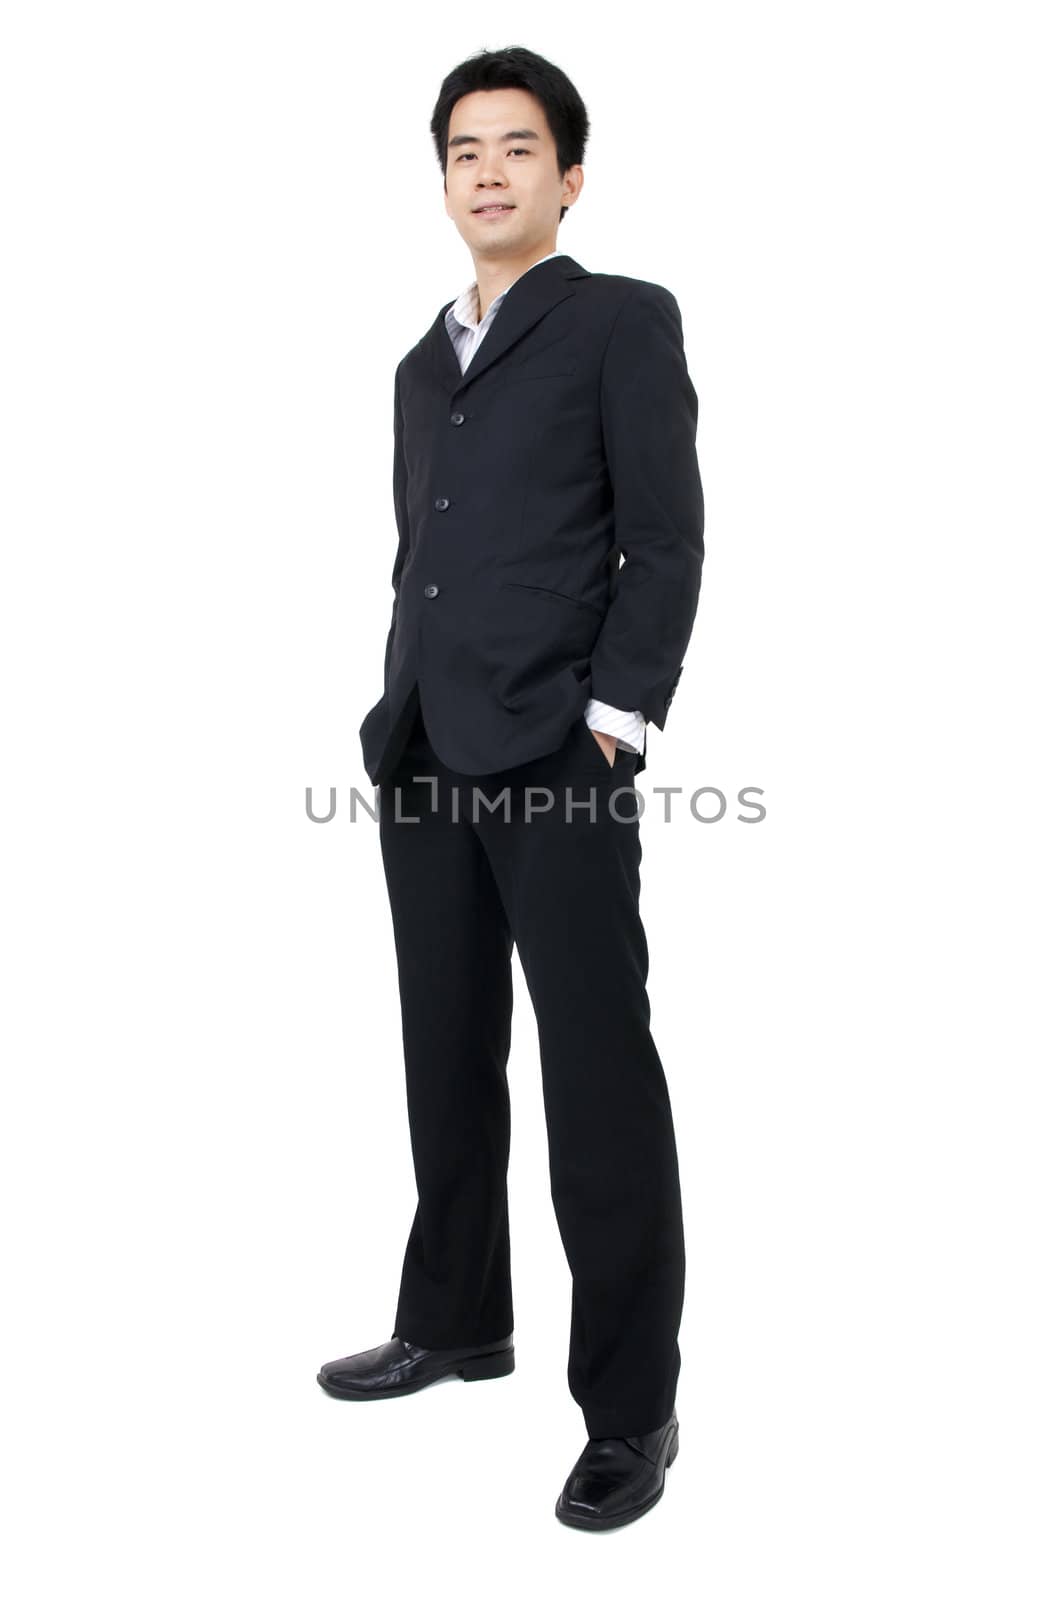 Full body of a smiling young Asian executive standing against isolated white background